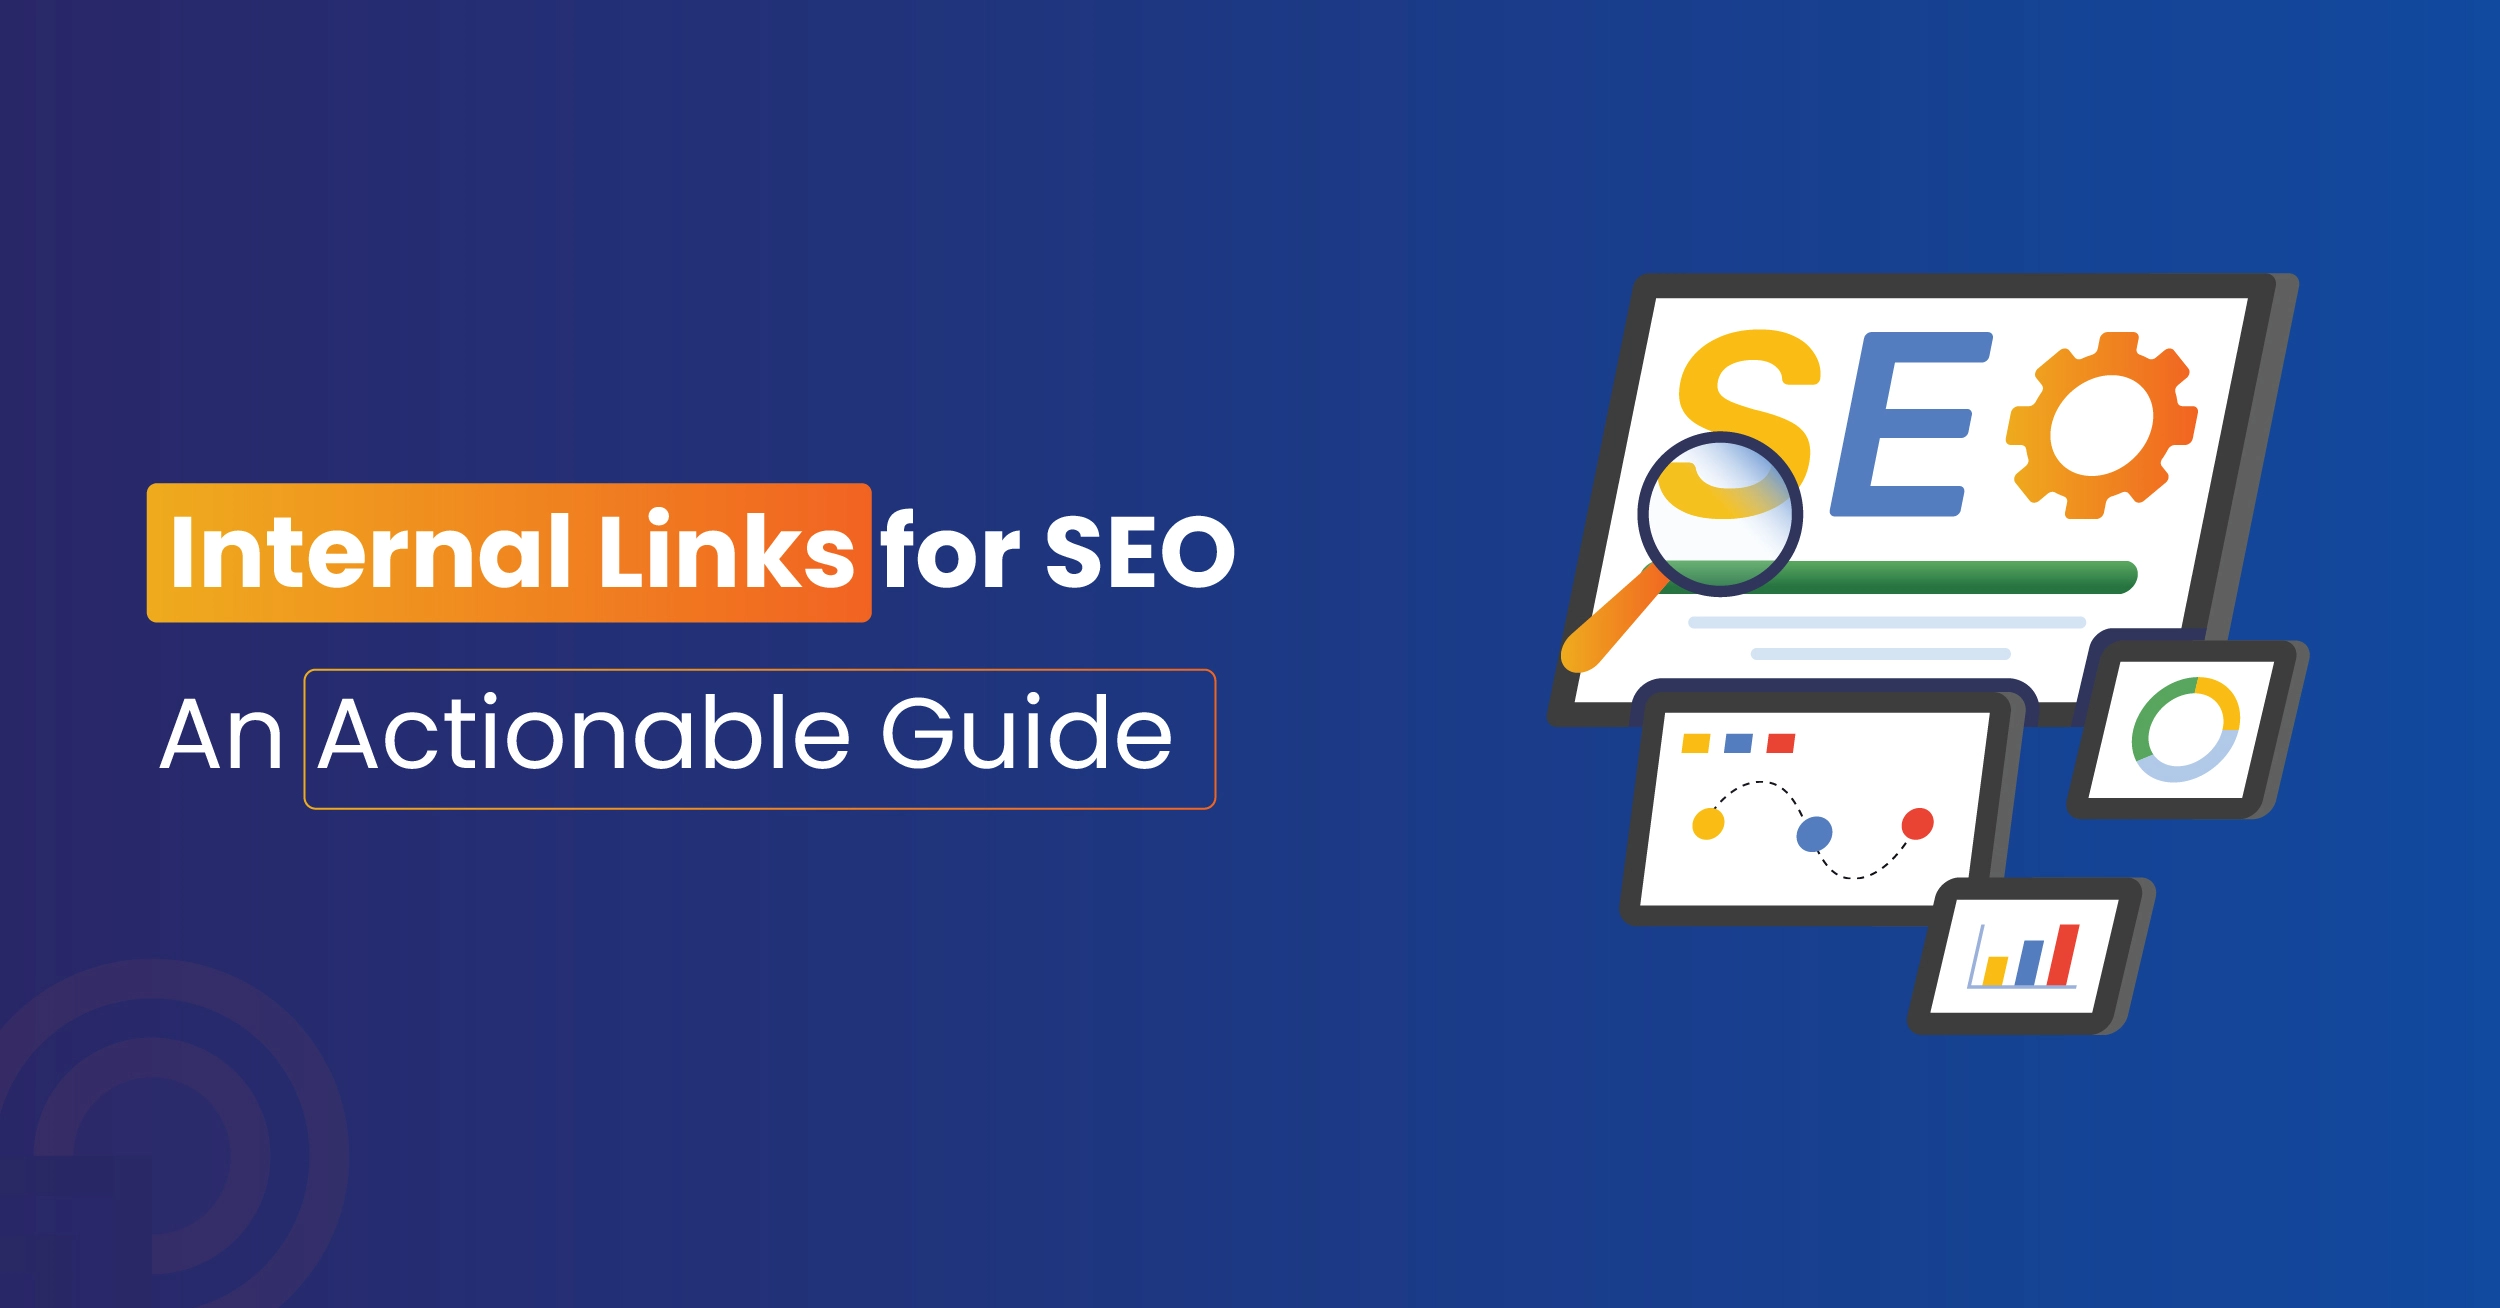 Internal Links for SEO: An Actionable Guide